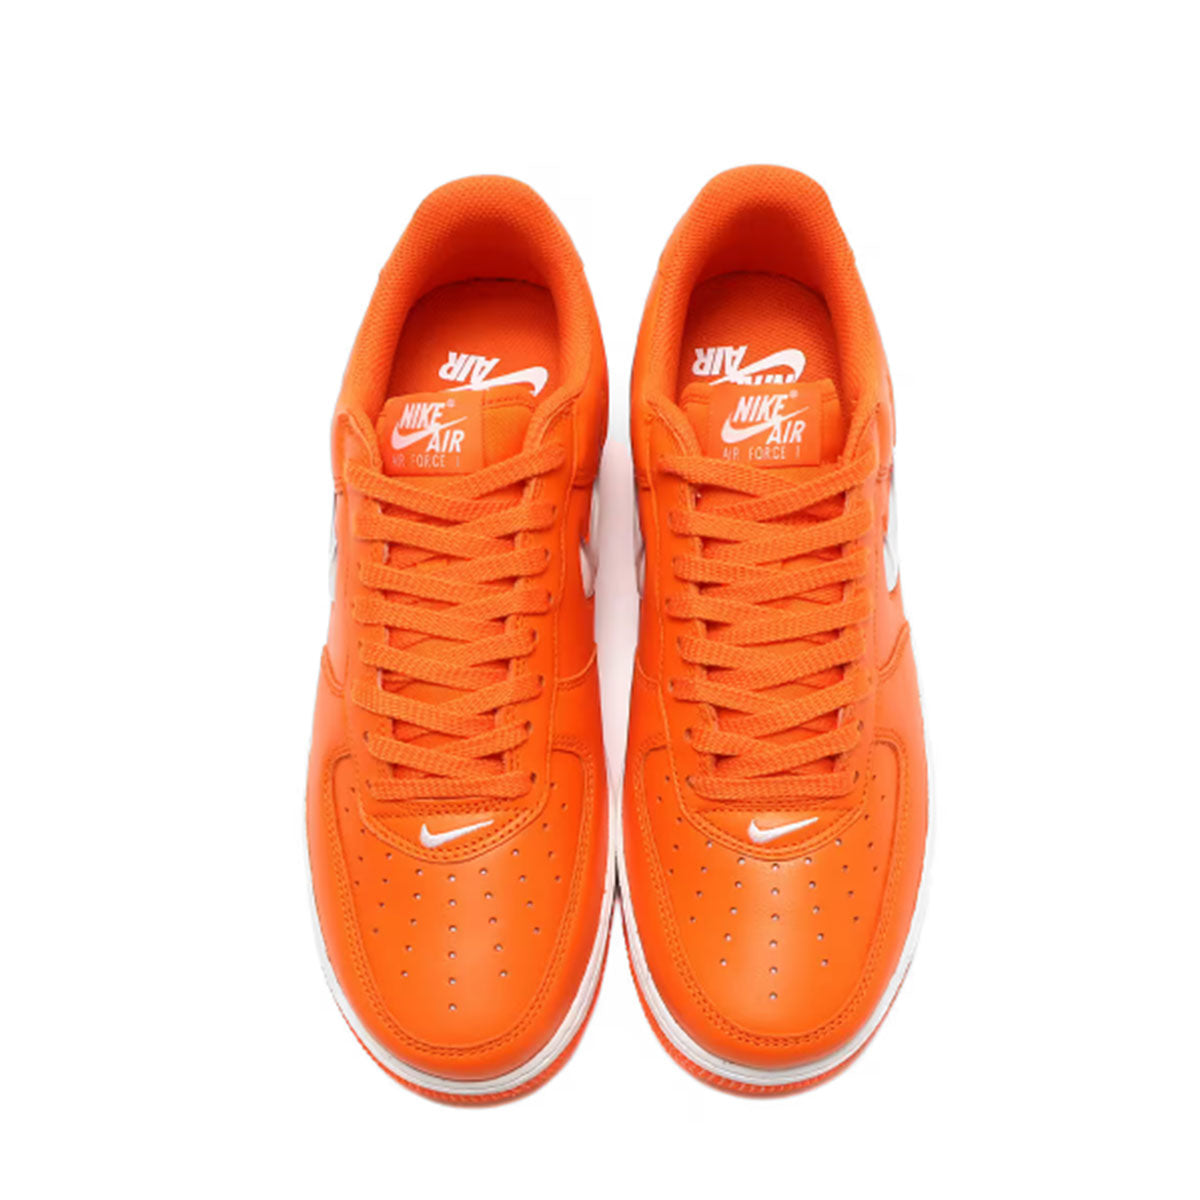 NIKE Air Force 1 Low Color of the Month Orange Jewel ナイキ エア フォース １ ロー 